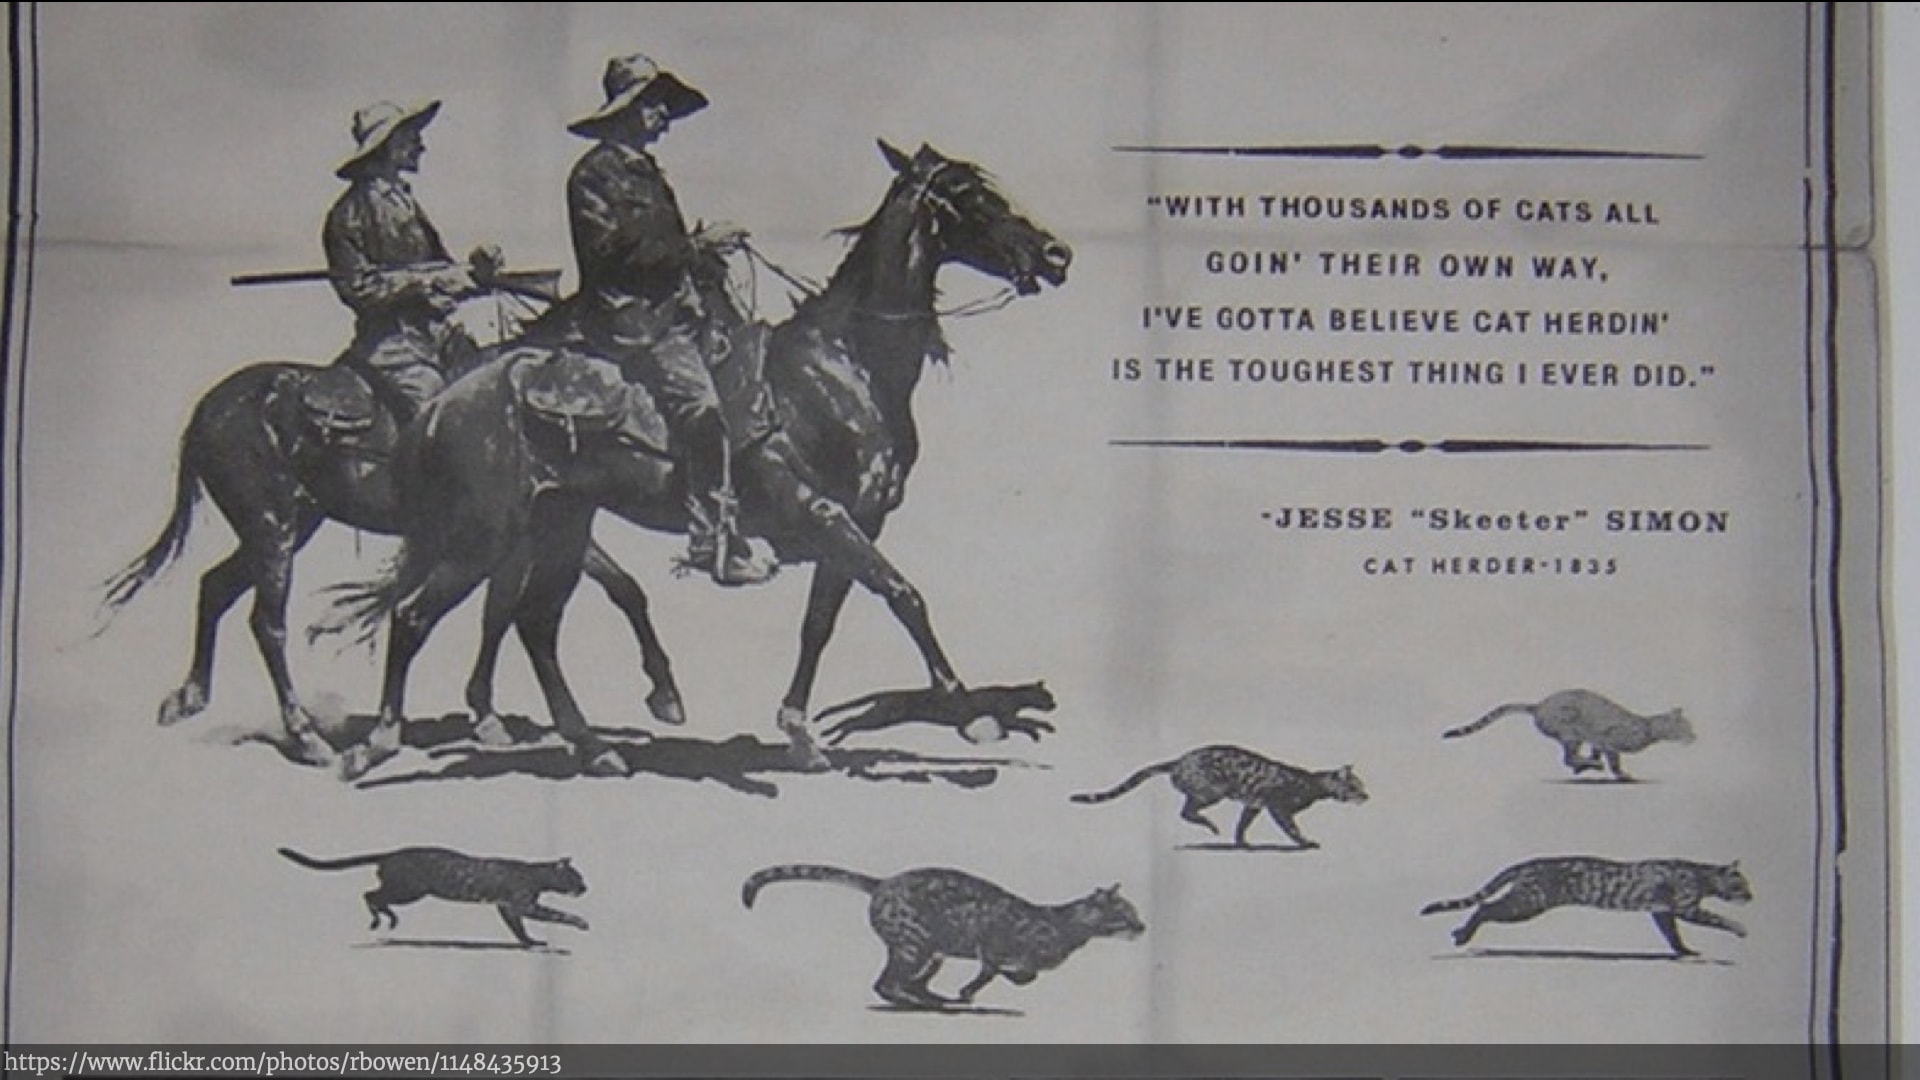 A photo of a mock advert that includes two cowboys herding cats.